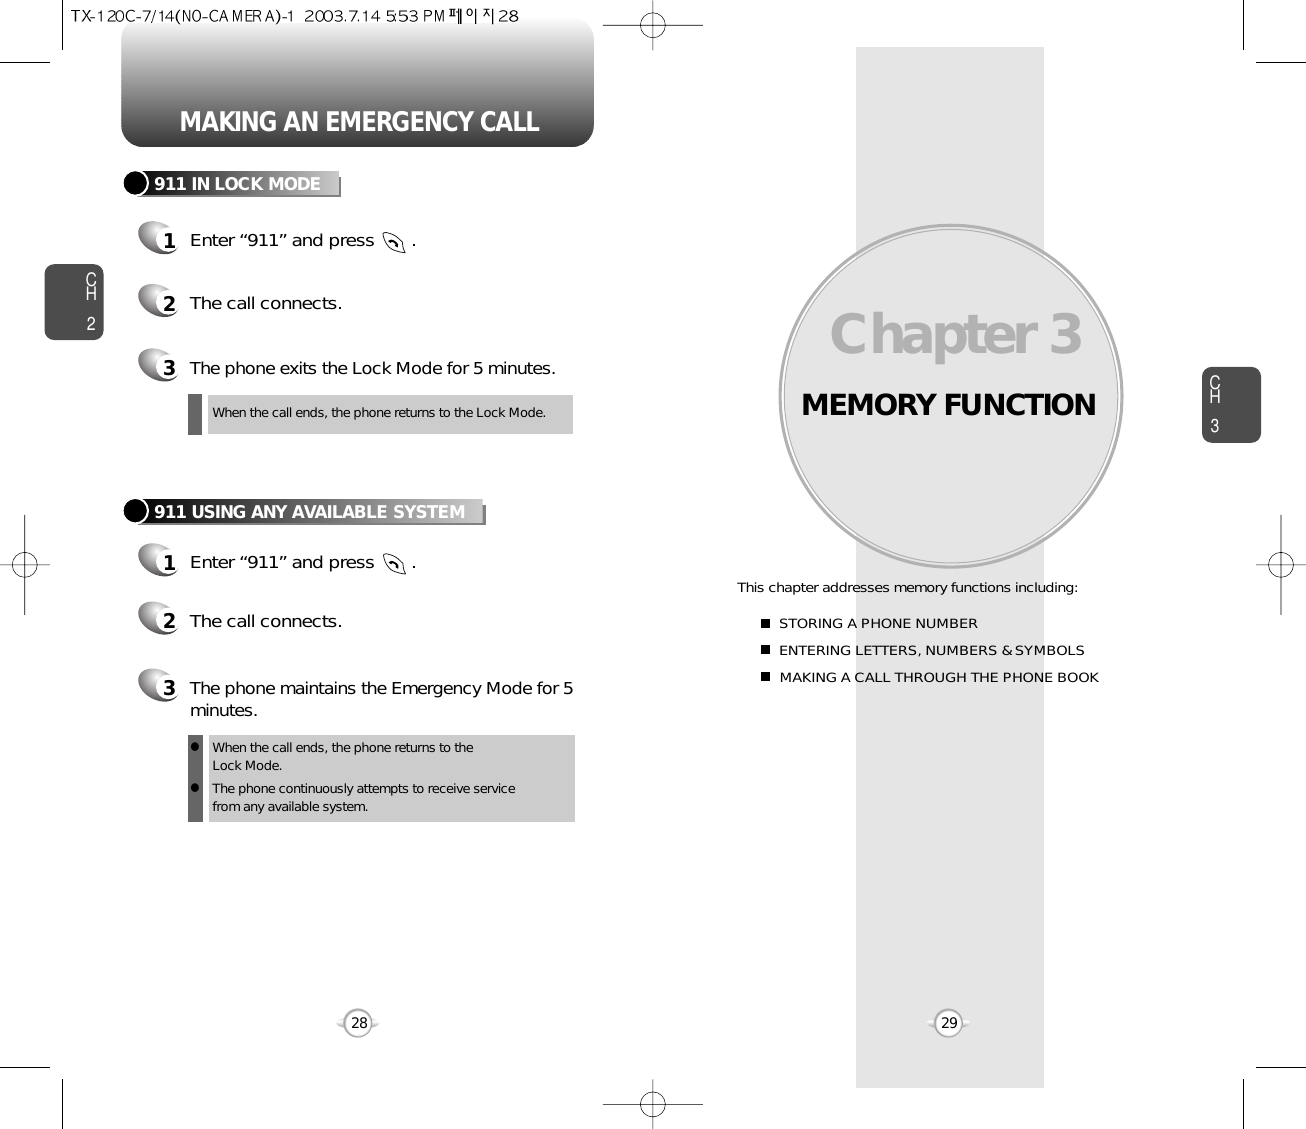 MEMORY FUNCTIONThis chapter addresses memory functions including:Chapter 3 CH329MAKING AN EMERGENCY CALLCH228STORING A PHONE NUMBERENTERING LETTERS, NUMBERS &amp; SYMBOLSMAKING A CALL THROUGH THE PHONE BOOK911 IN LOCK MODE1Enter “911” and press       .When the call ends, the phone returns to the Lock Mode.2The call connects.3The phone exits the Lock Mode for 5 minutes.911 USING ANY AVAILABLE SYSTEM1Enter “911” and press       .When the call ends, the phone returns to the Lock Mode.The phone continuously attempts to receive service from any available system.2The call connects.3The phone maintains the Emergency Mode for 5minutes.ll